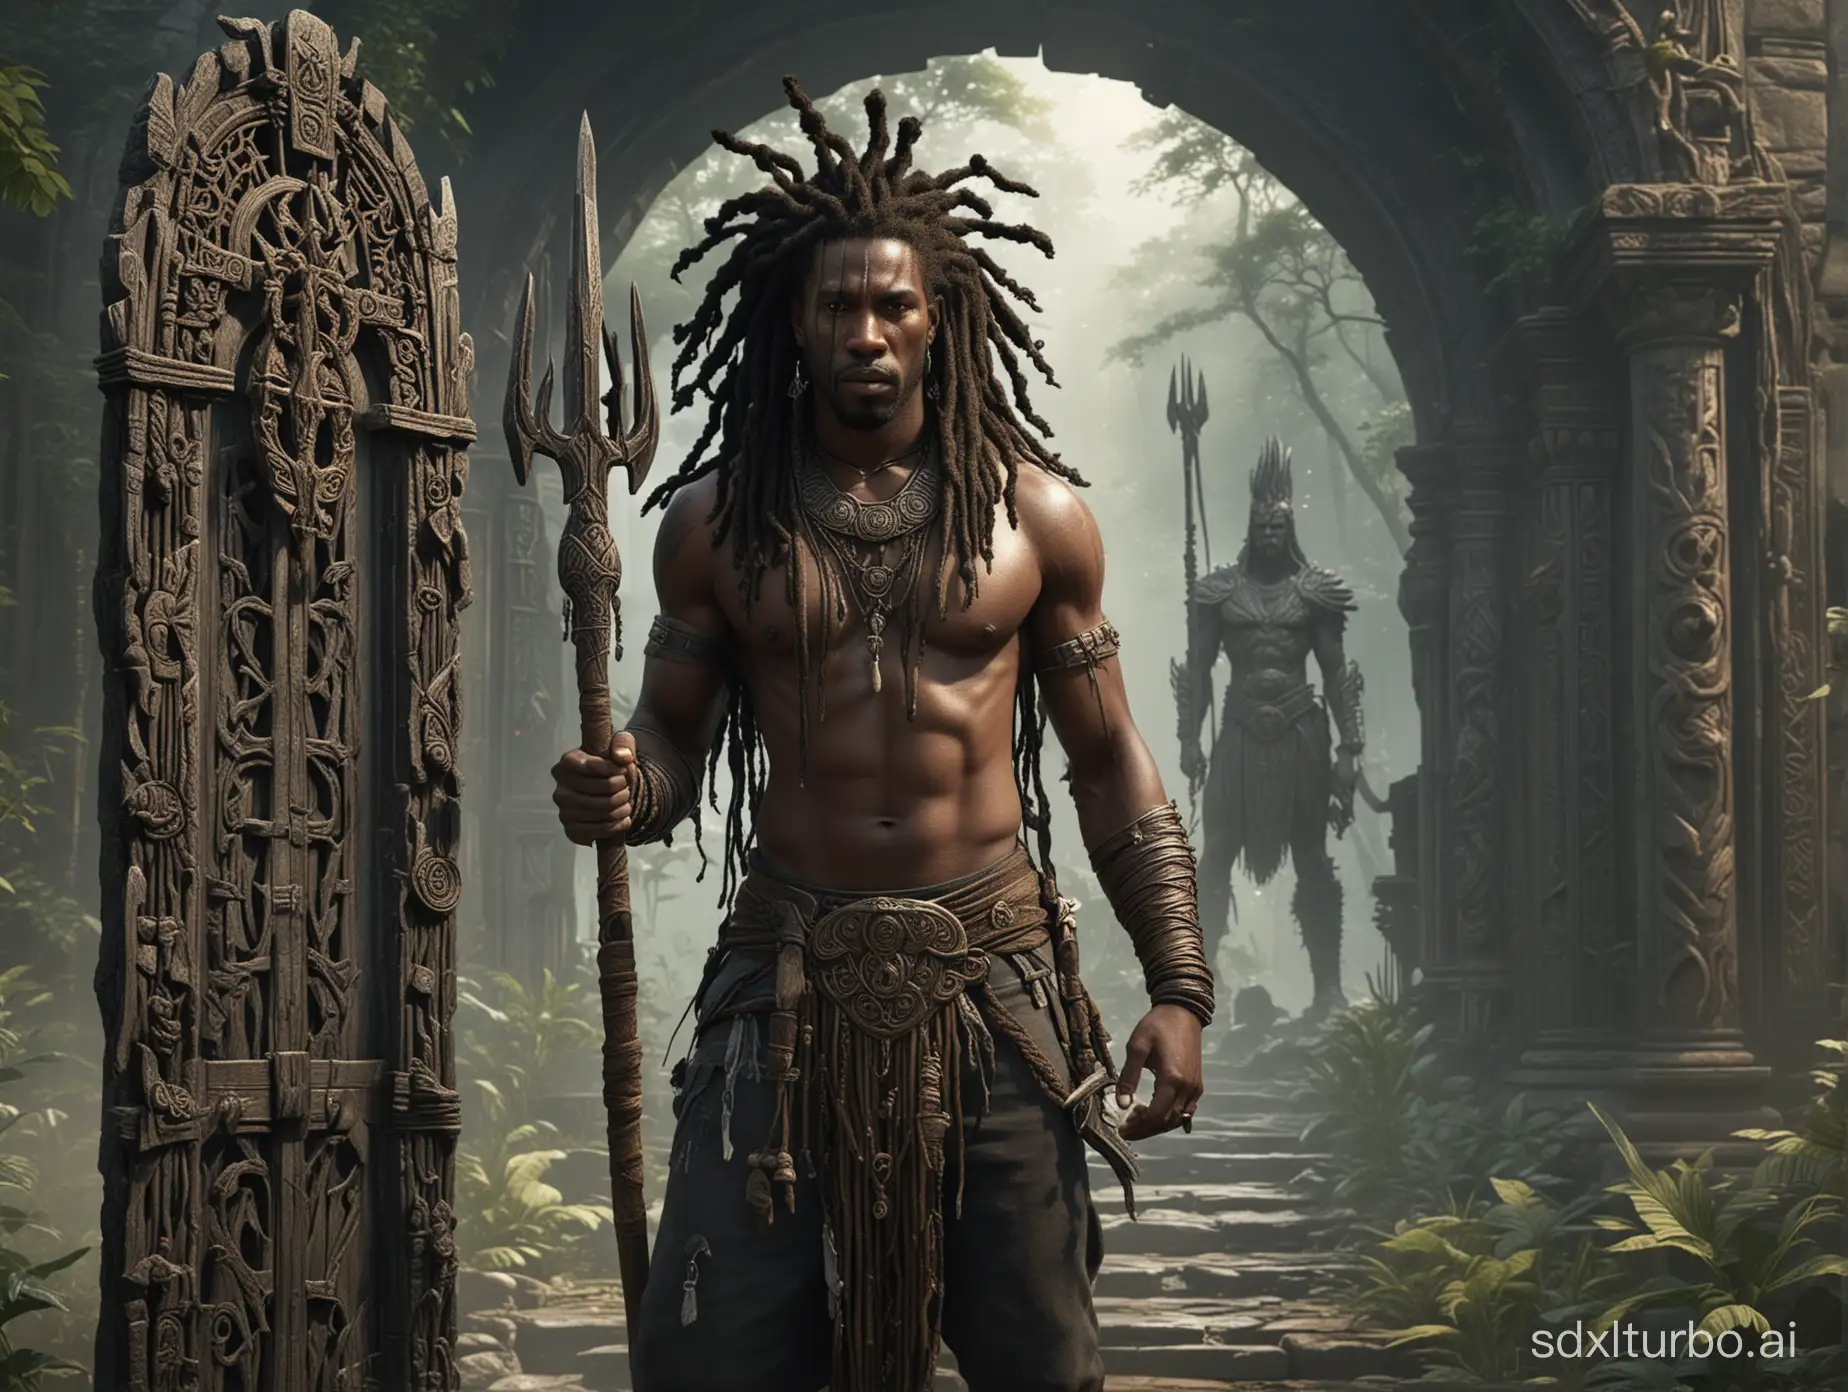 The high-resolution, detailed image shows a black man with dreadlocks, standing at the entrance to a mystical portal and holding a trident in his hands. He presents the imposing appearance of a warrior and is wearing a headdress and appears to be the main focus of the scene. In the background, there are several enchanted beings, giving more depth to the image.